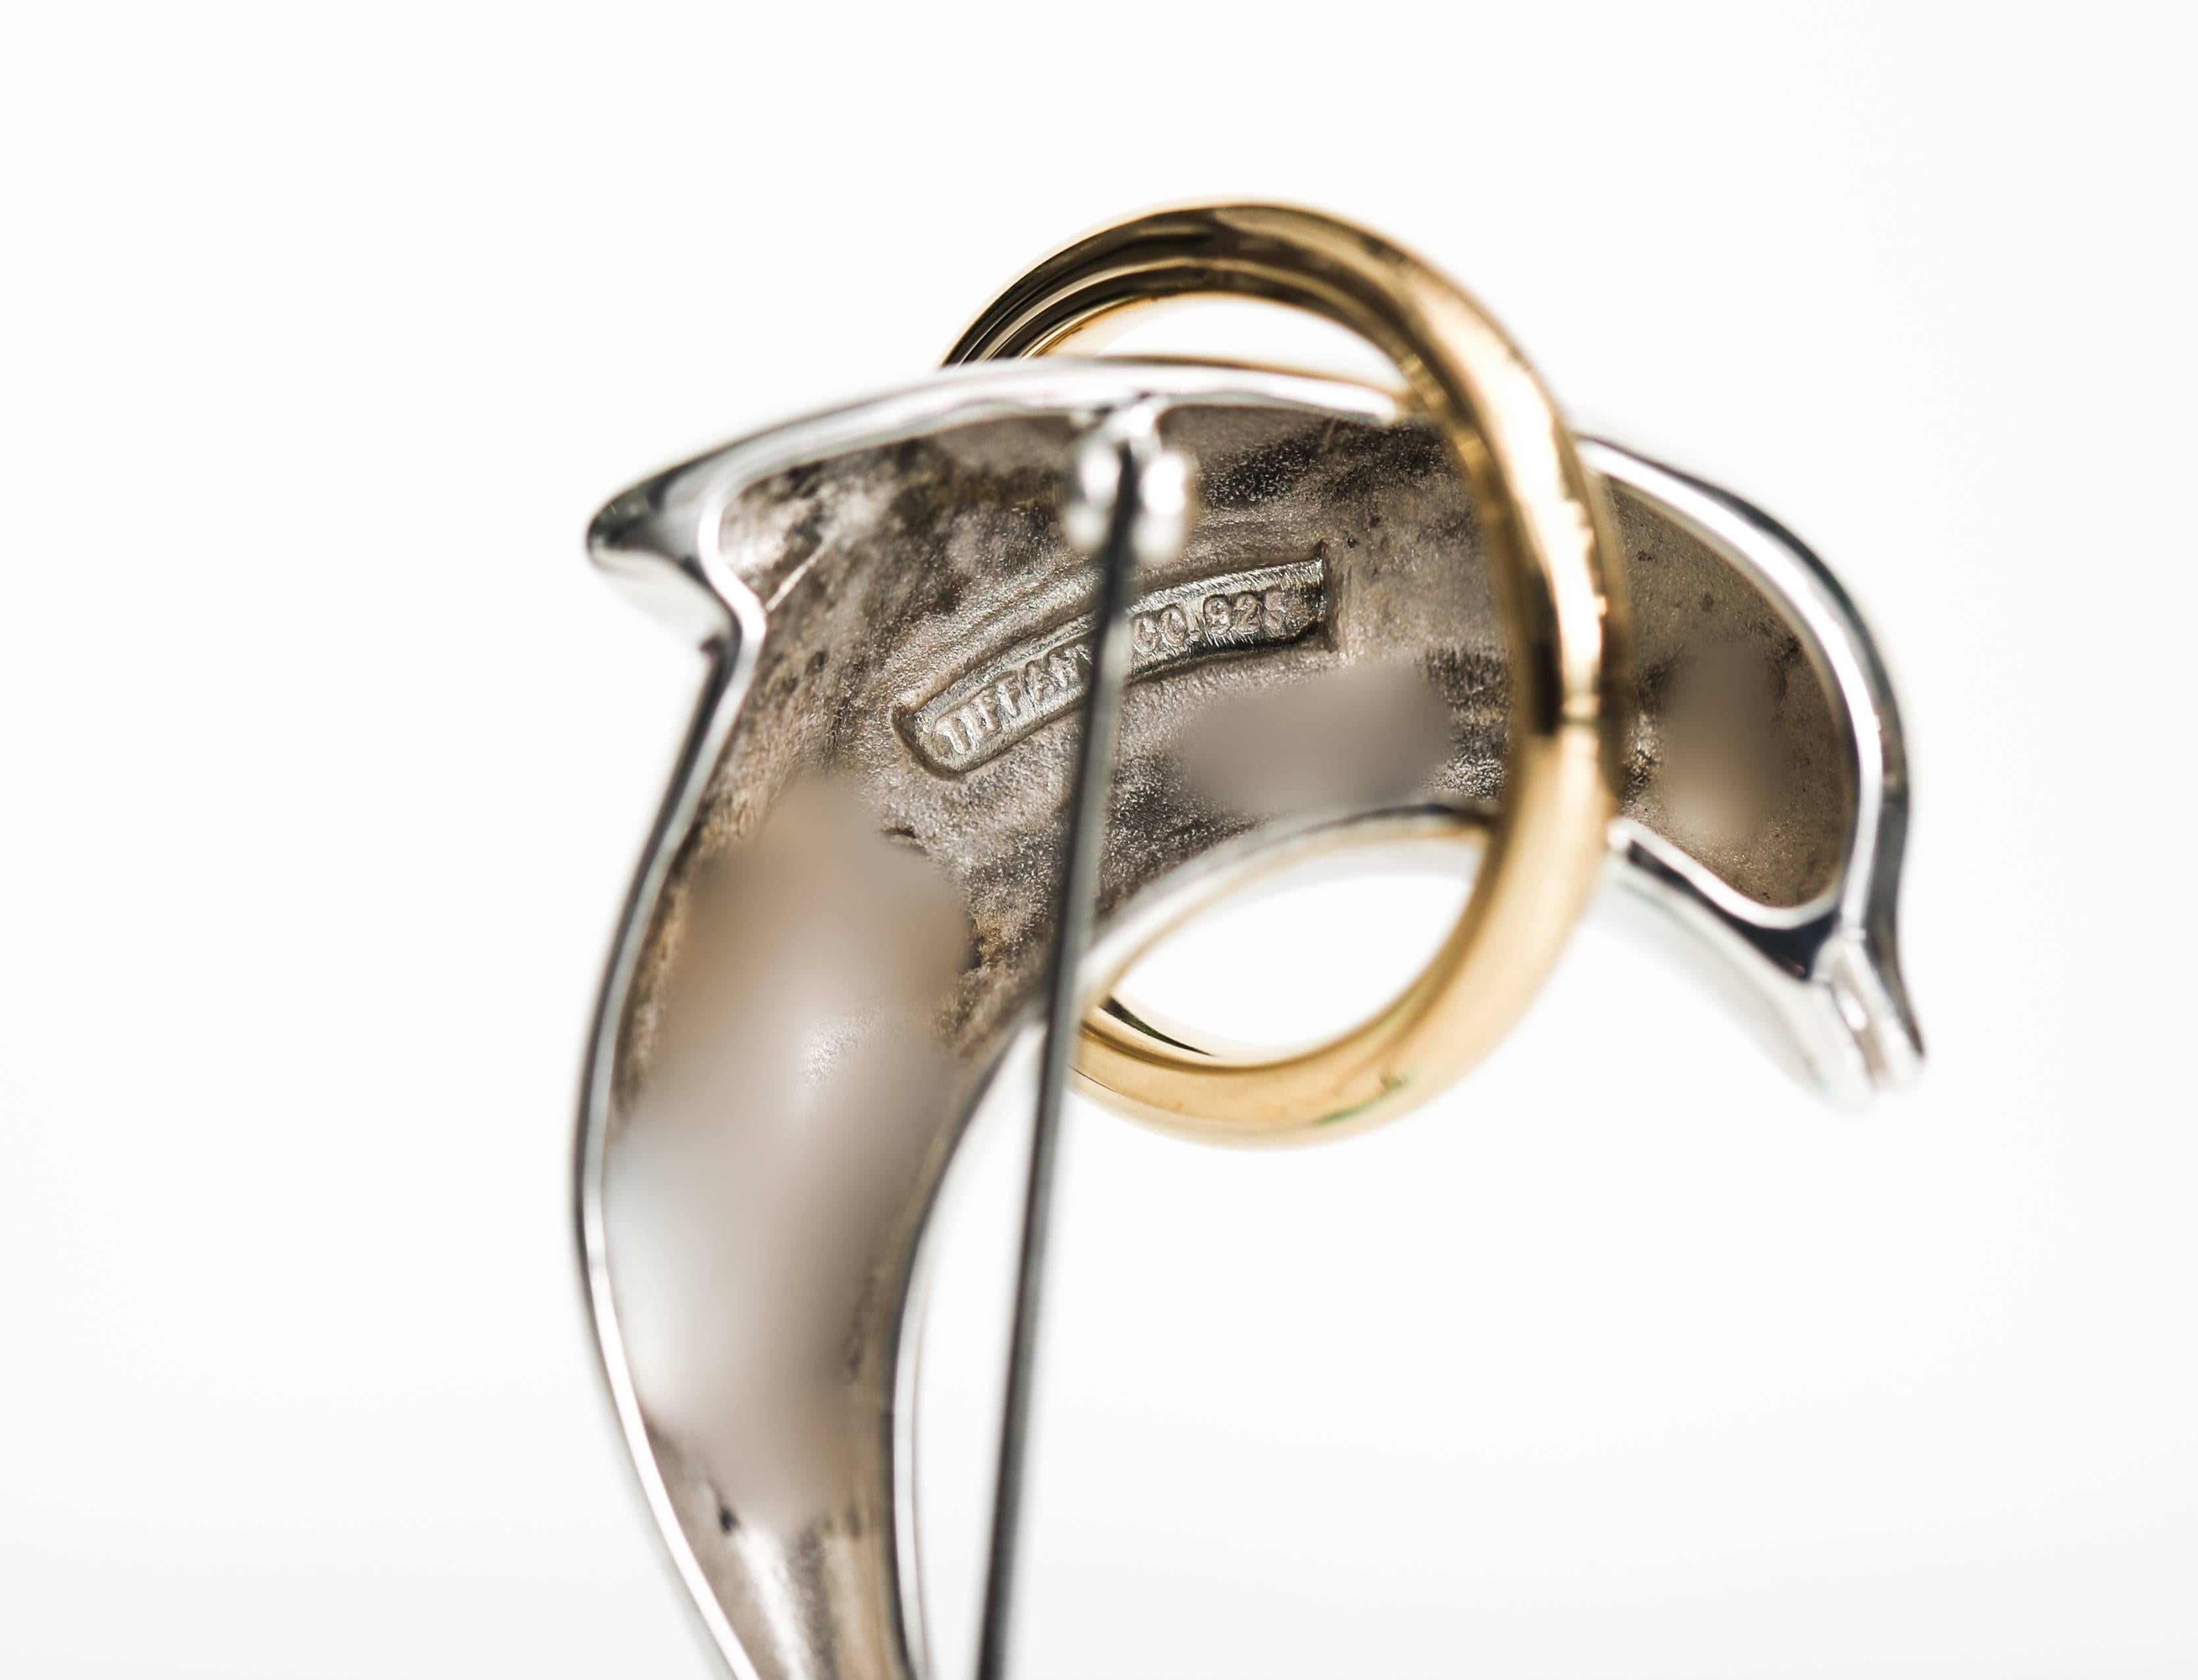 1990s Tiffany and Co. Dolphin Pin - 18 Karat Yellow Gold, Sterling Silver

Features a Sterling Silver Dolphin jumping through an 18 Karat Yellow Gold Ring. This sweet dolphin has delicate eye and mouth detail and 2 flippers. This Beautiful Brooch